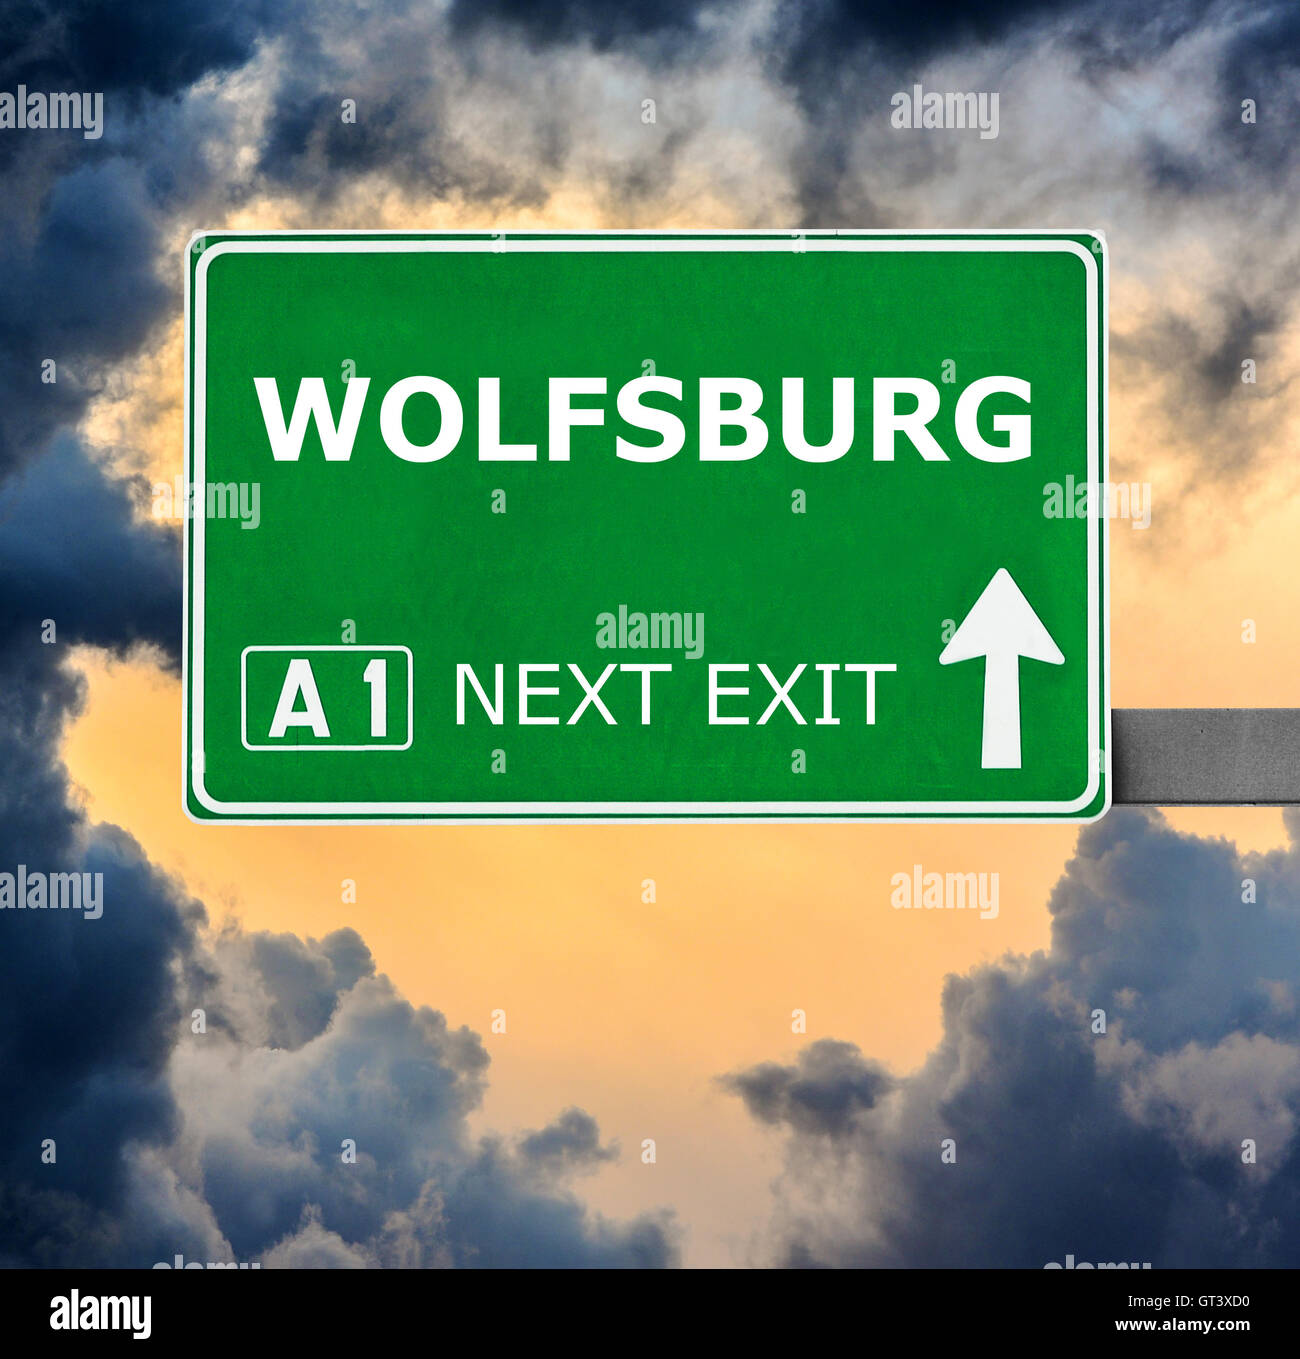 WOLFSBURG road sign against clear blue sky Stock Photo